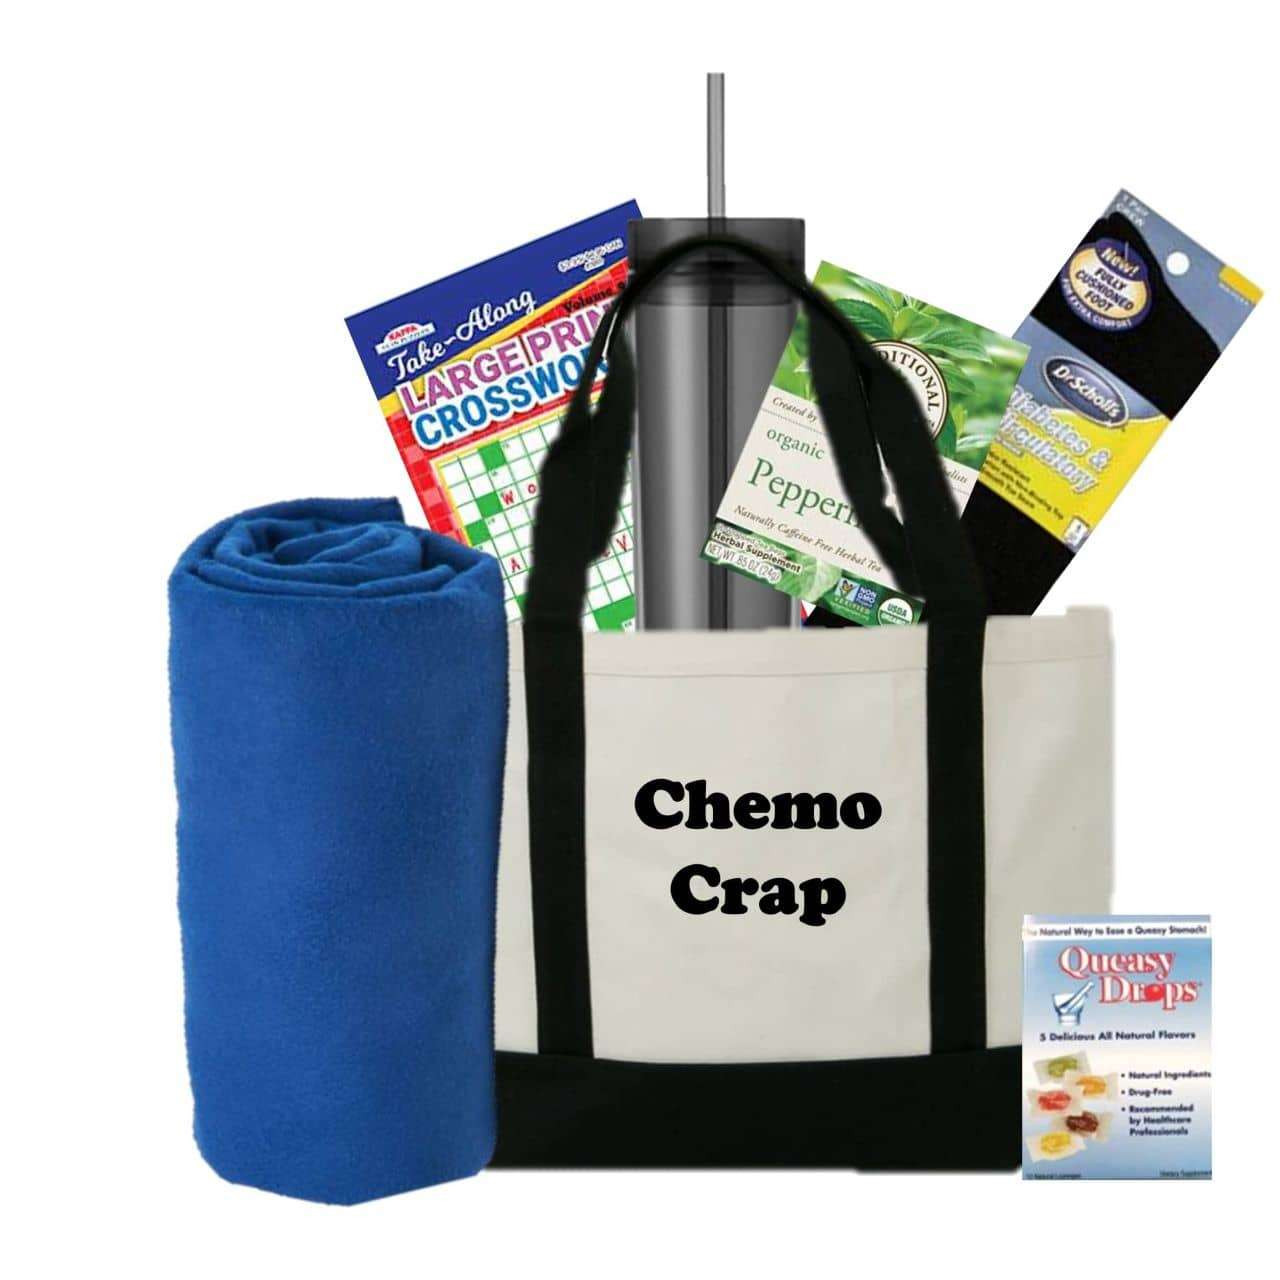 Chemo Crap Cancer Gift For Men - Big Queasy